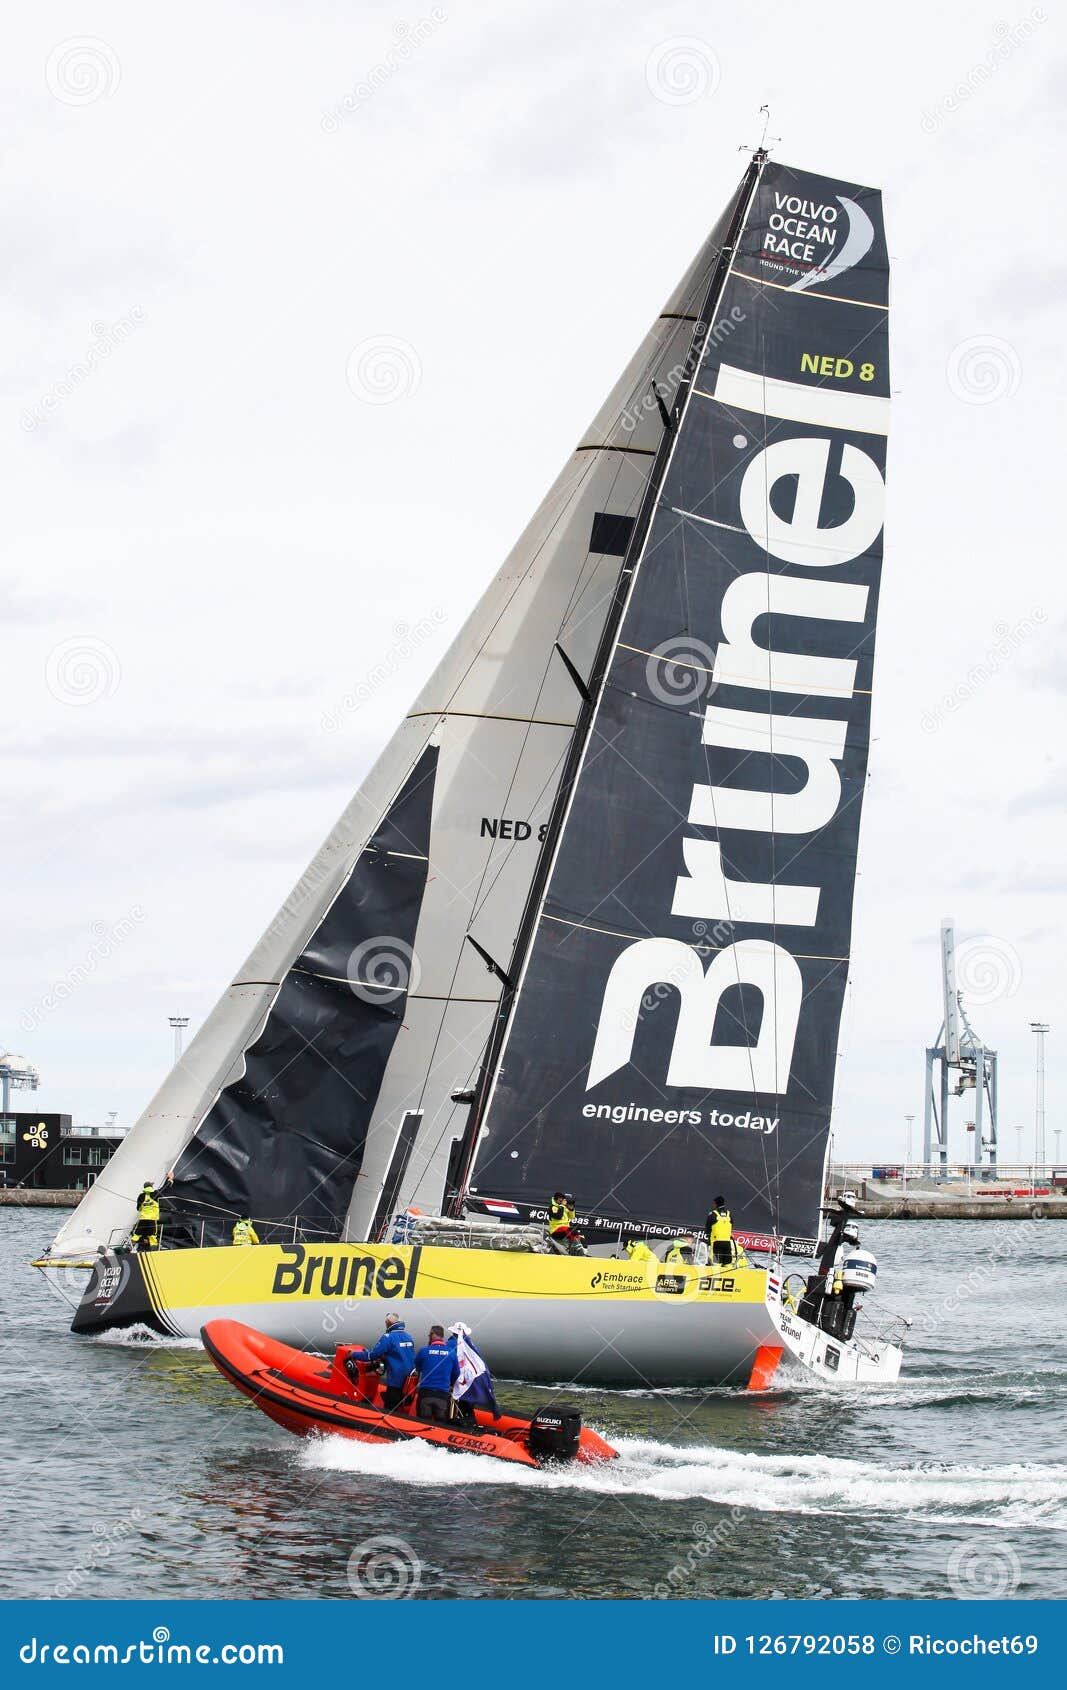 Volvo Ocean Race With The Team Brunel Yacht In The Harbor